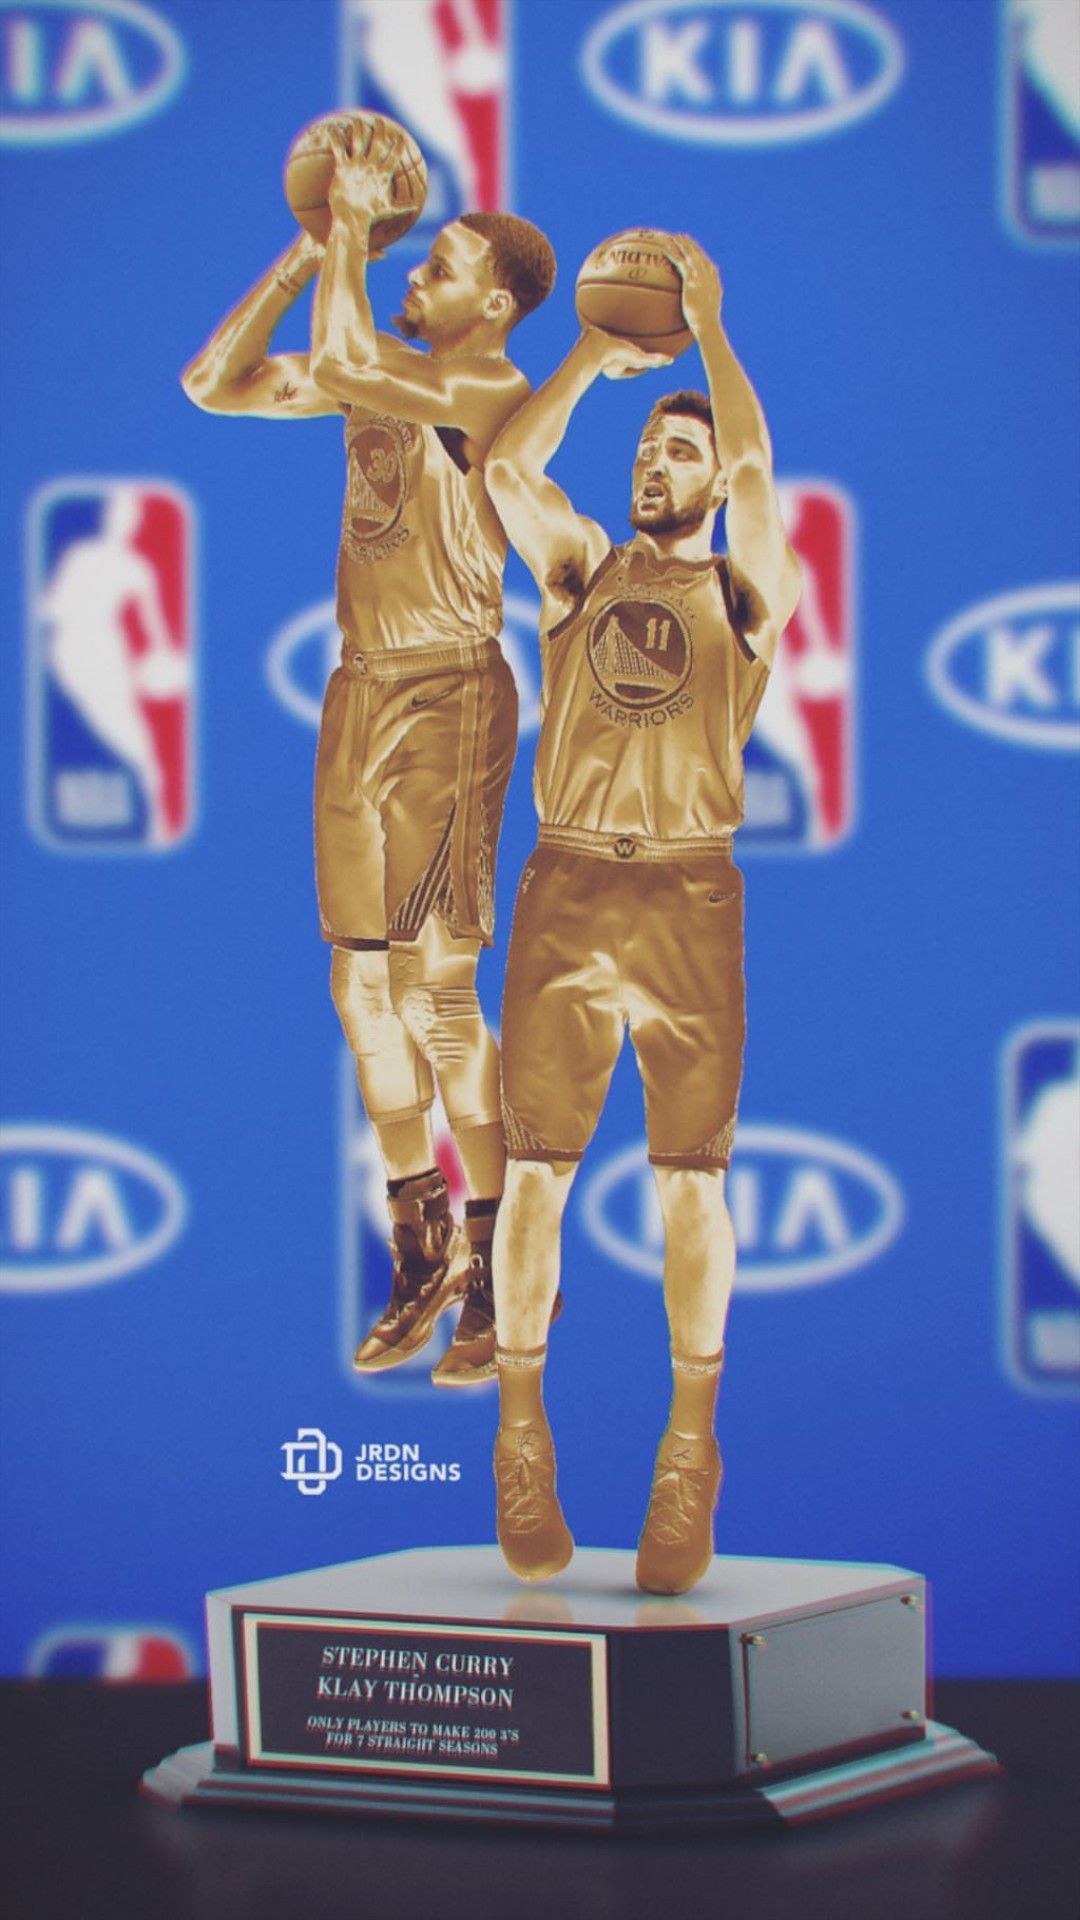 Stephen Curry and Klay Thompson wallpaper. Klay thompson wallpaper, Klay thompson, Stephen curry